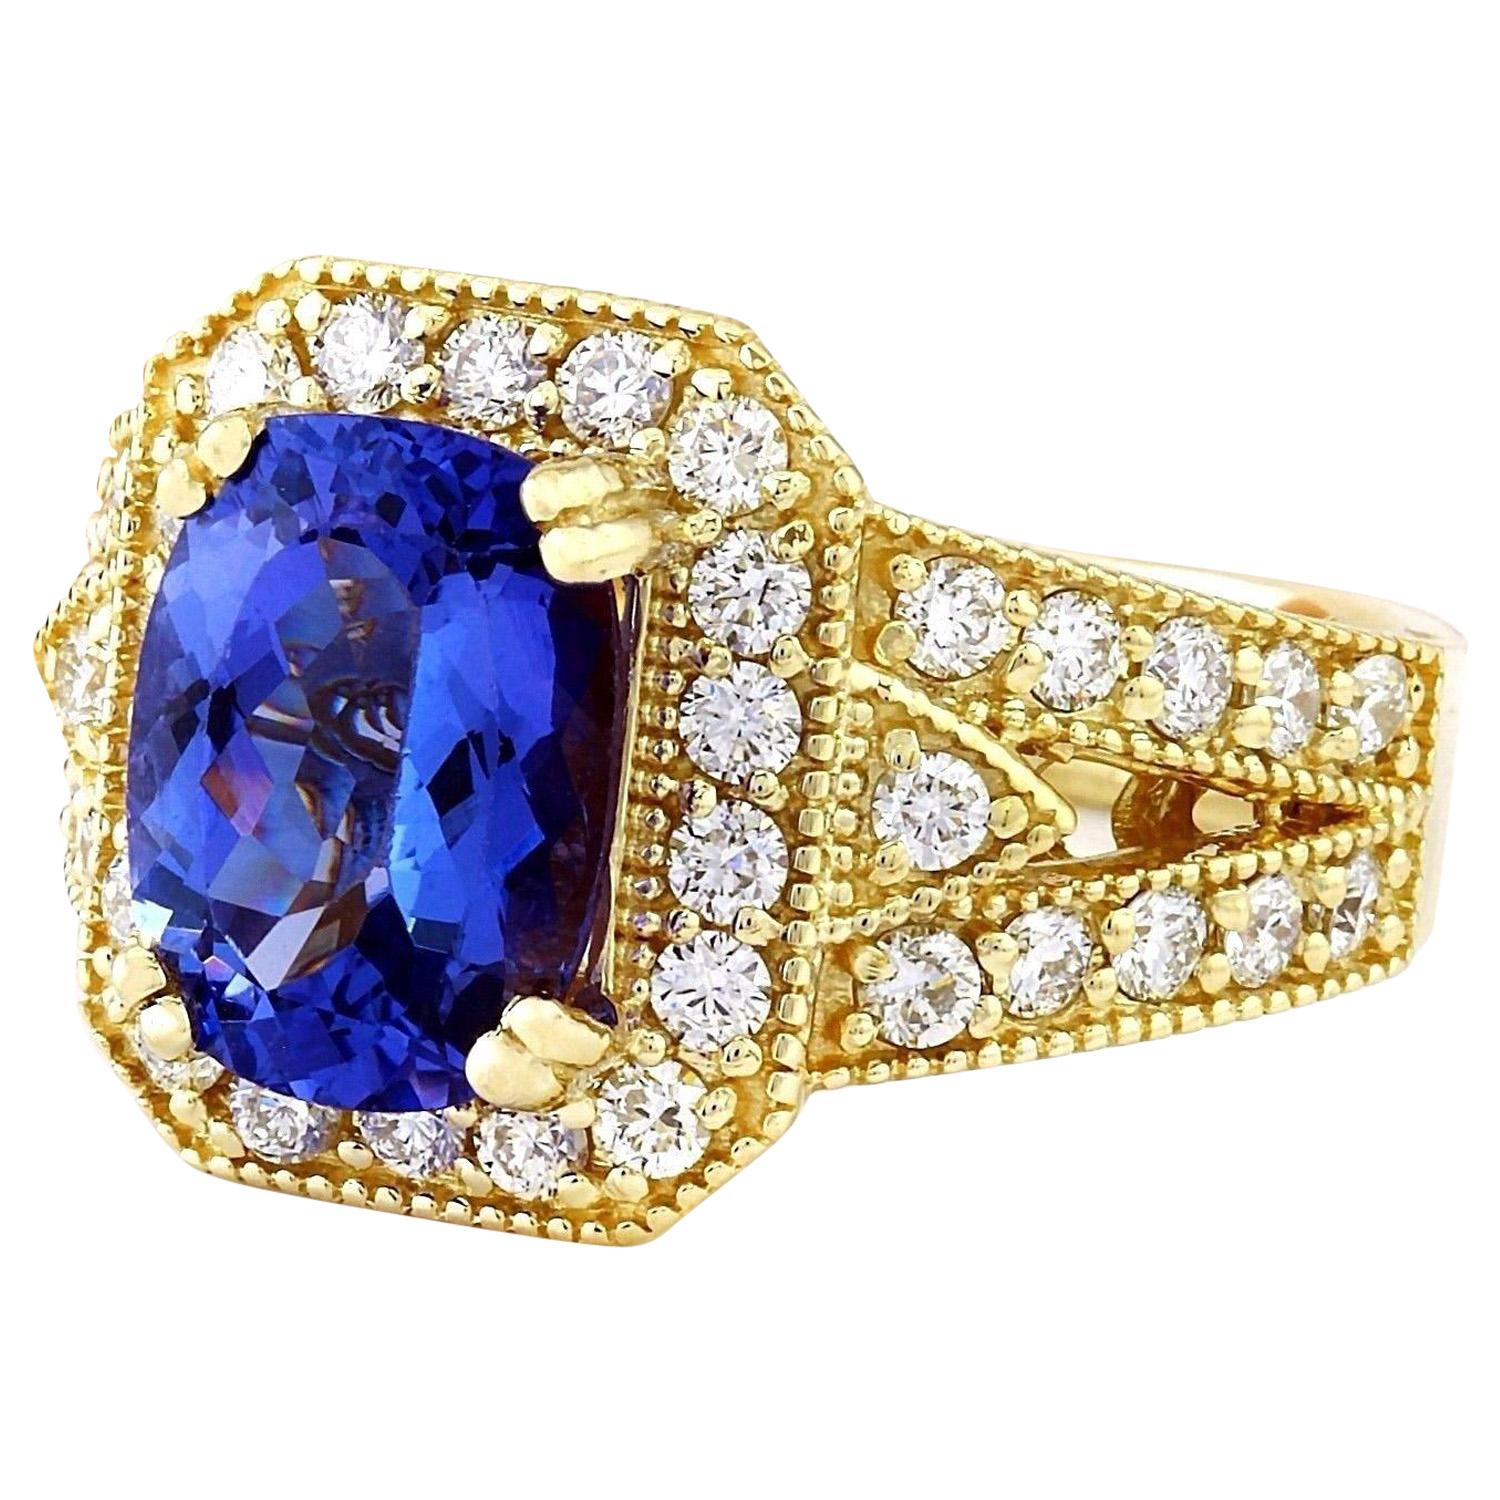 4.50 Carat Natural Tanzanite 14K Solid Yellow Gold Diamond Ring
 Item Type: Ring
 Item Style: Engagement
 Material: 14K Yellow Gold
 Mainstone: Tanzanite
 Stone Color: Blue
 Stone Weight: 3.30 Carat
 Stone Shape: Oval
 Stone Quantity: 1
 Stone